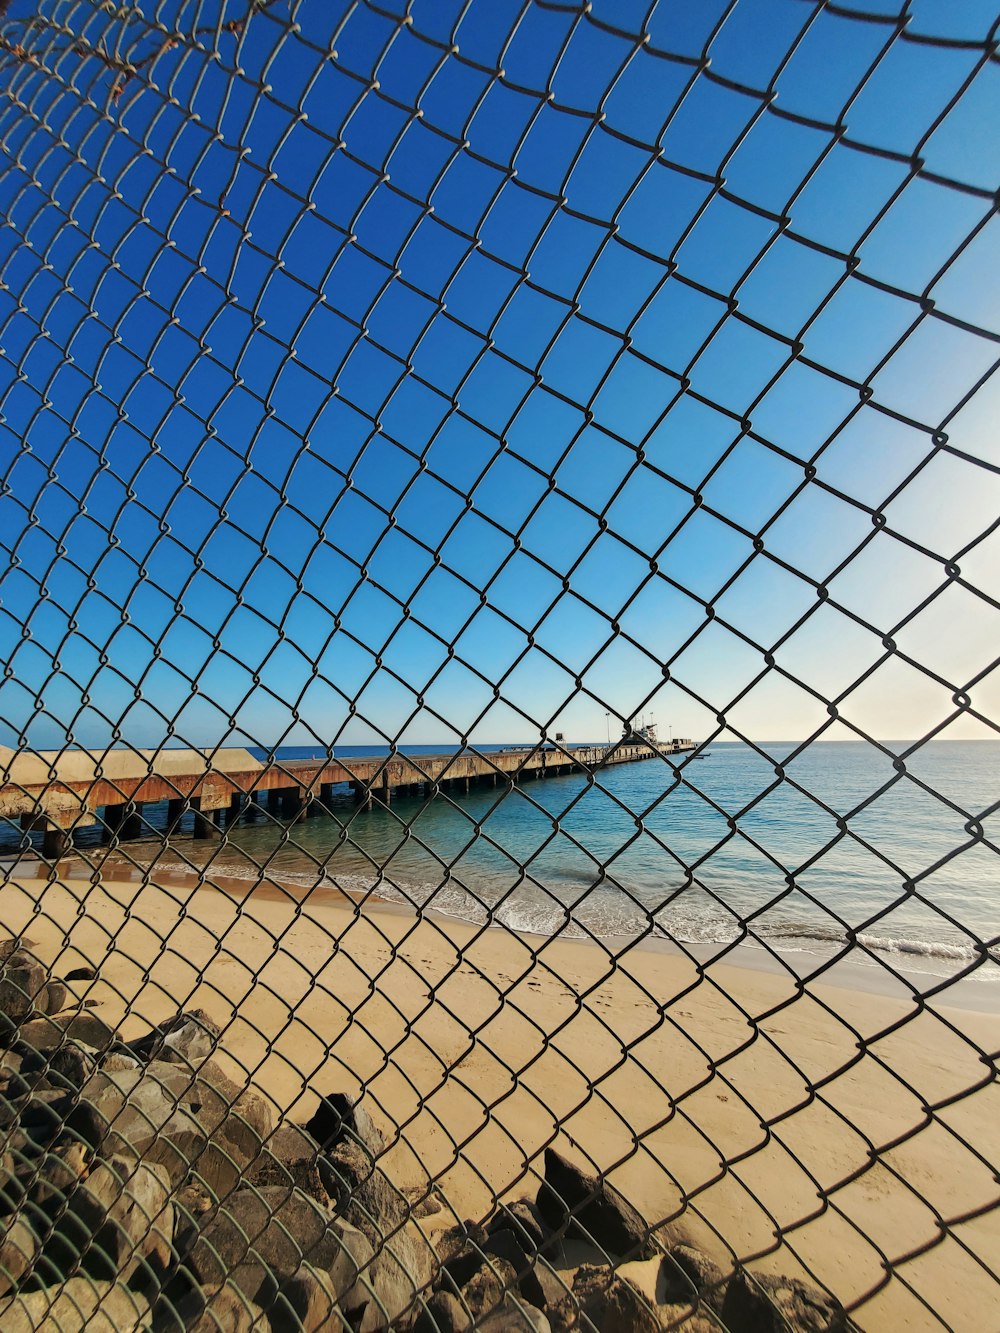 gray metal chain link fence near body of water during daytime